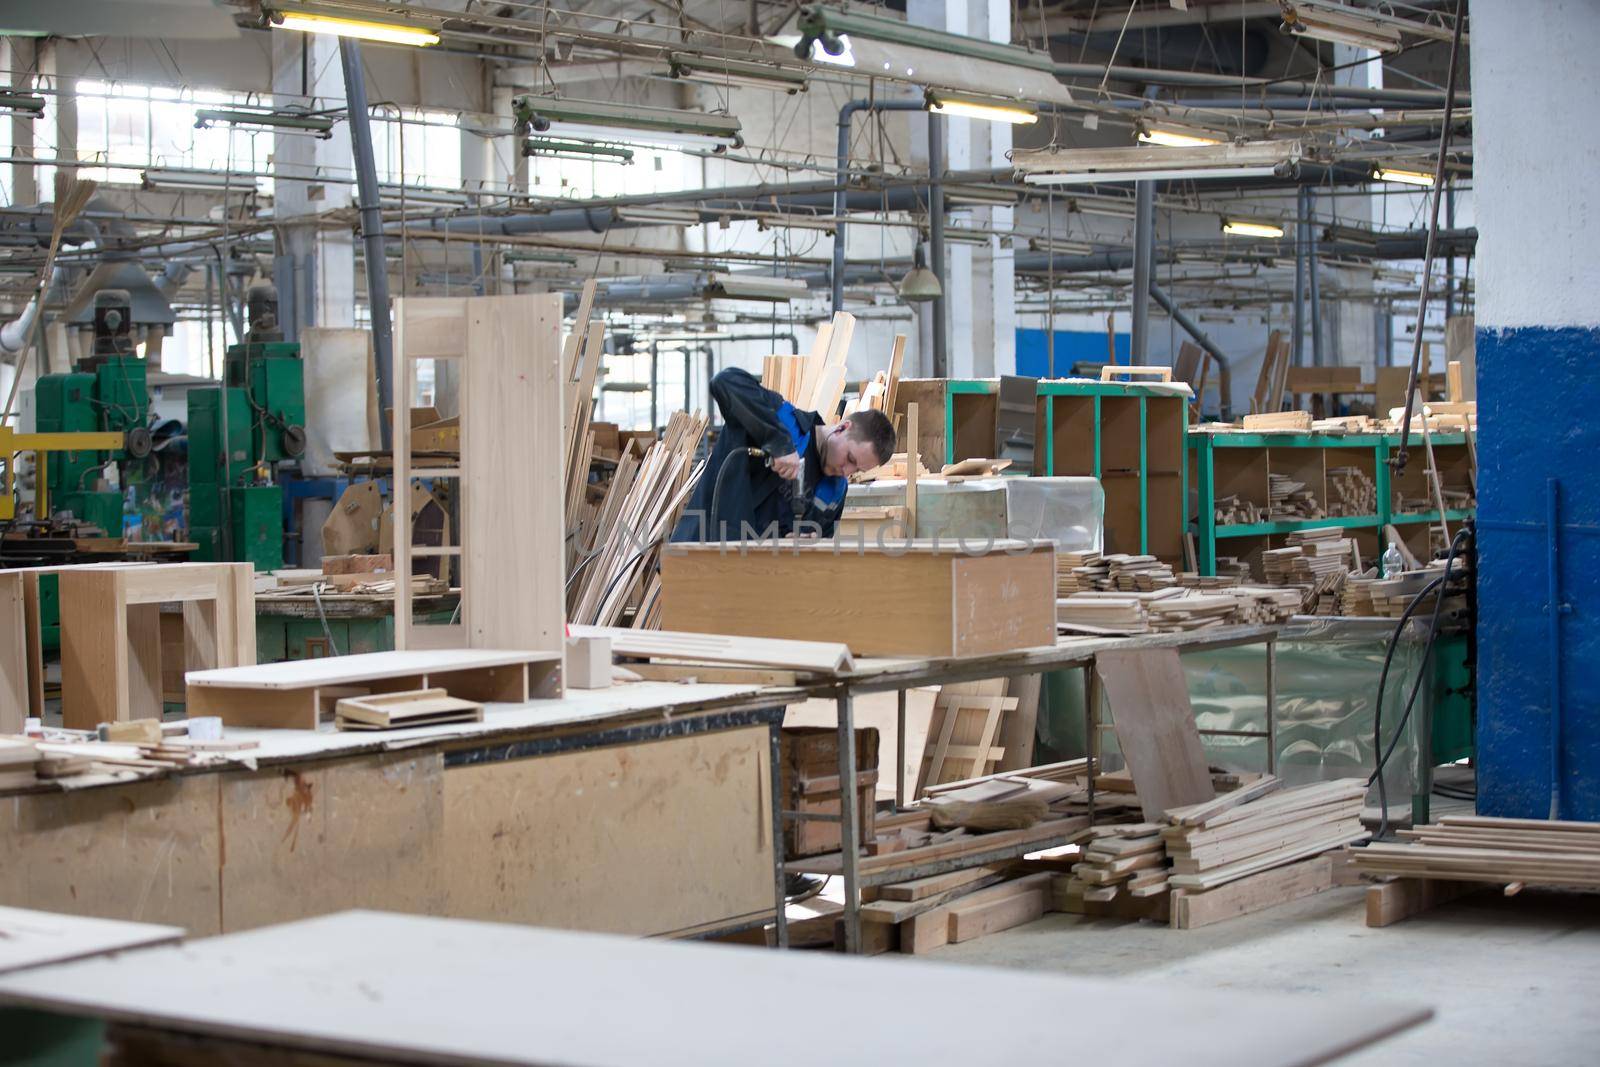 Shop for wood processing and furniture manufacturing. Workers make furniture cabinets